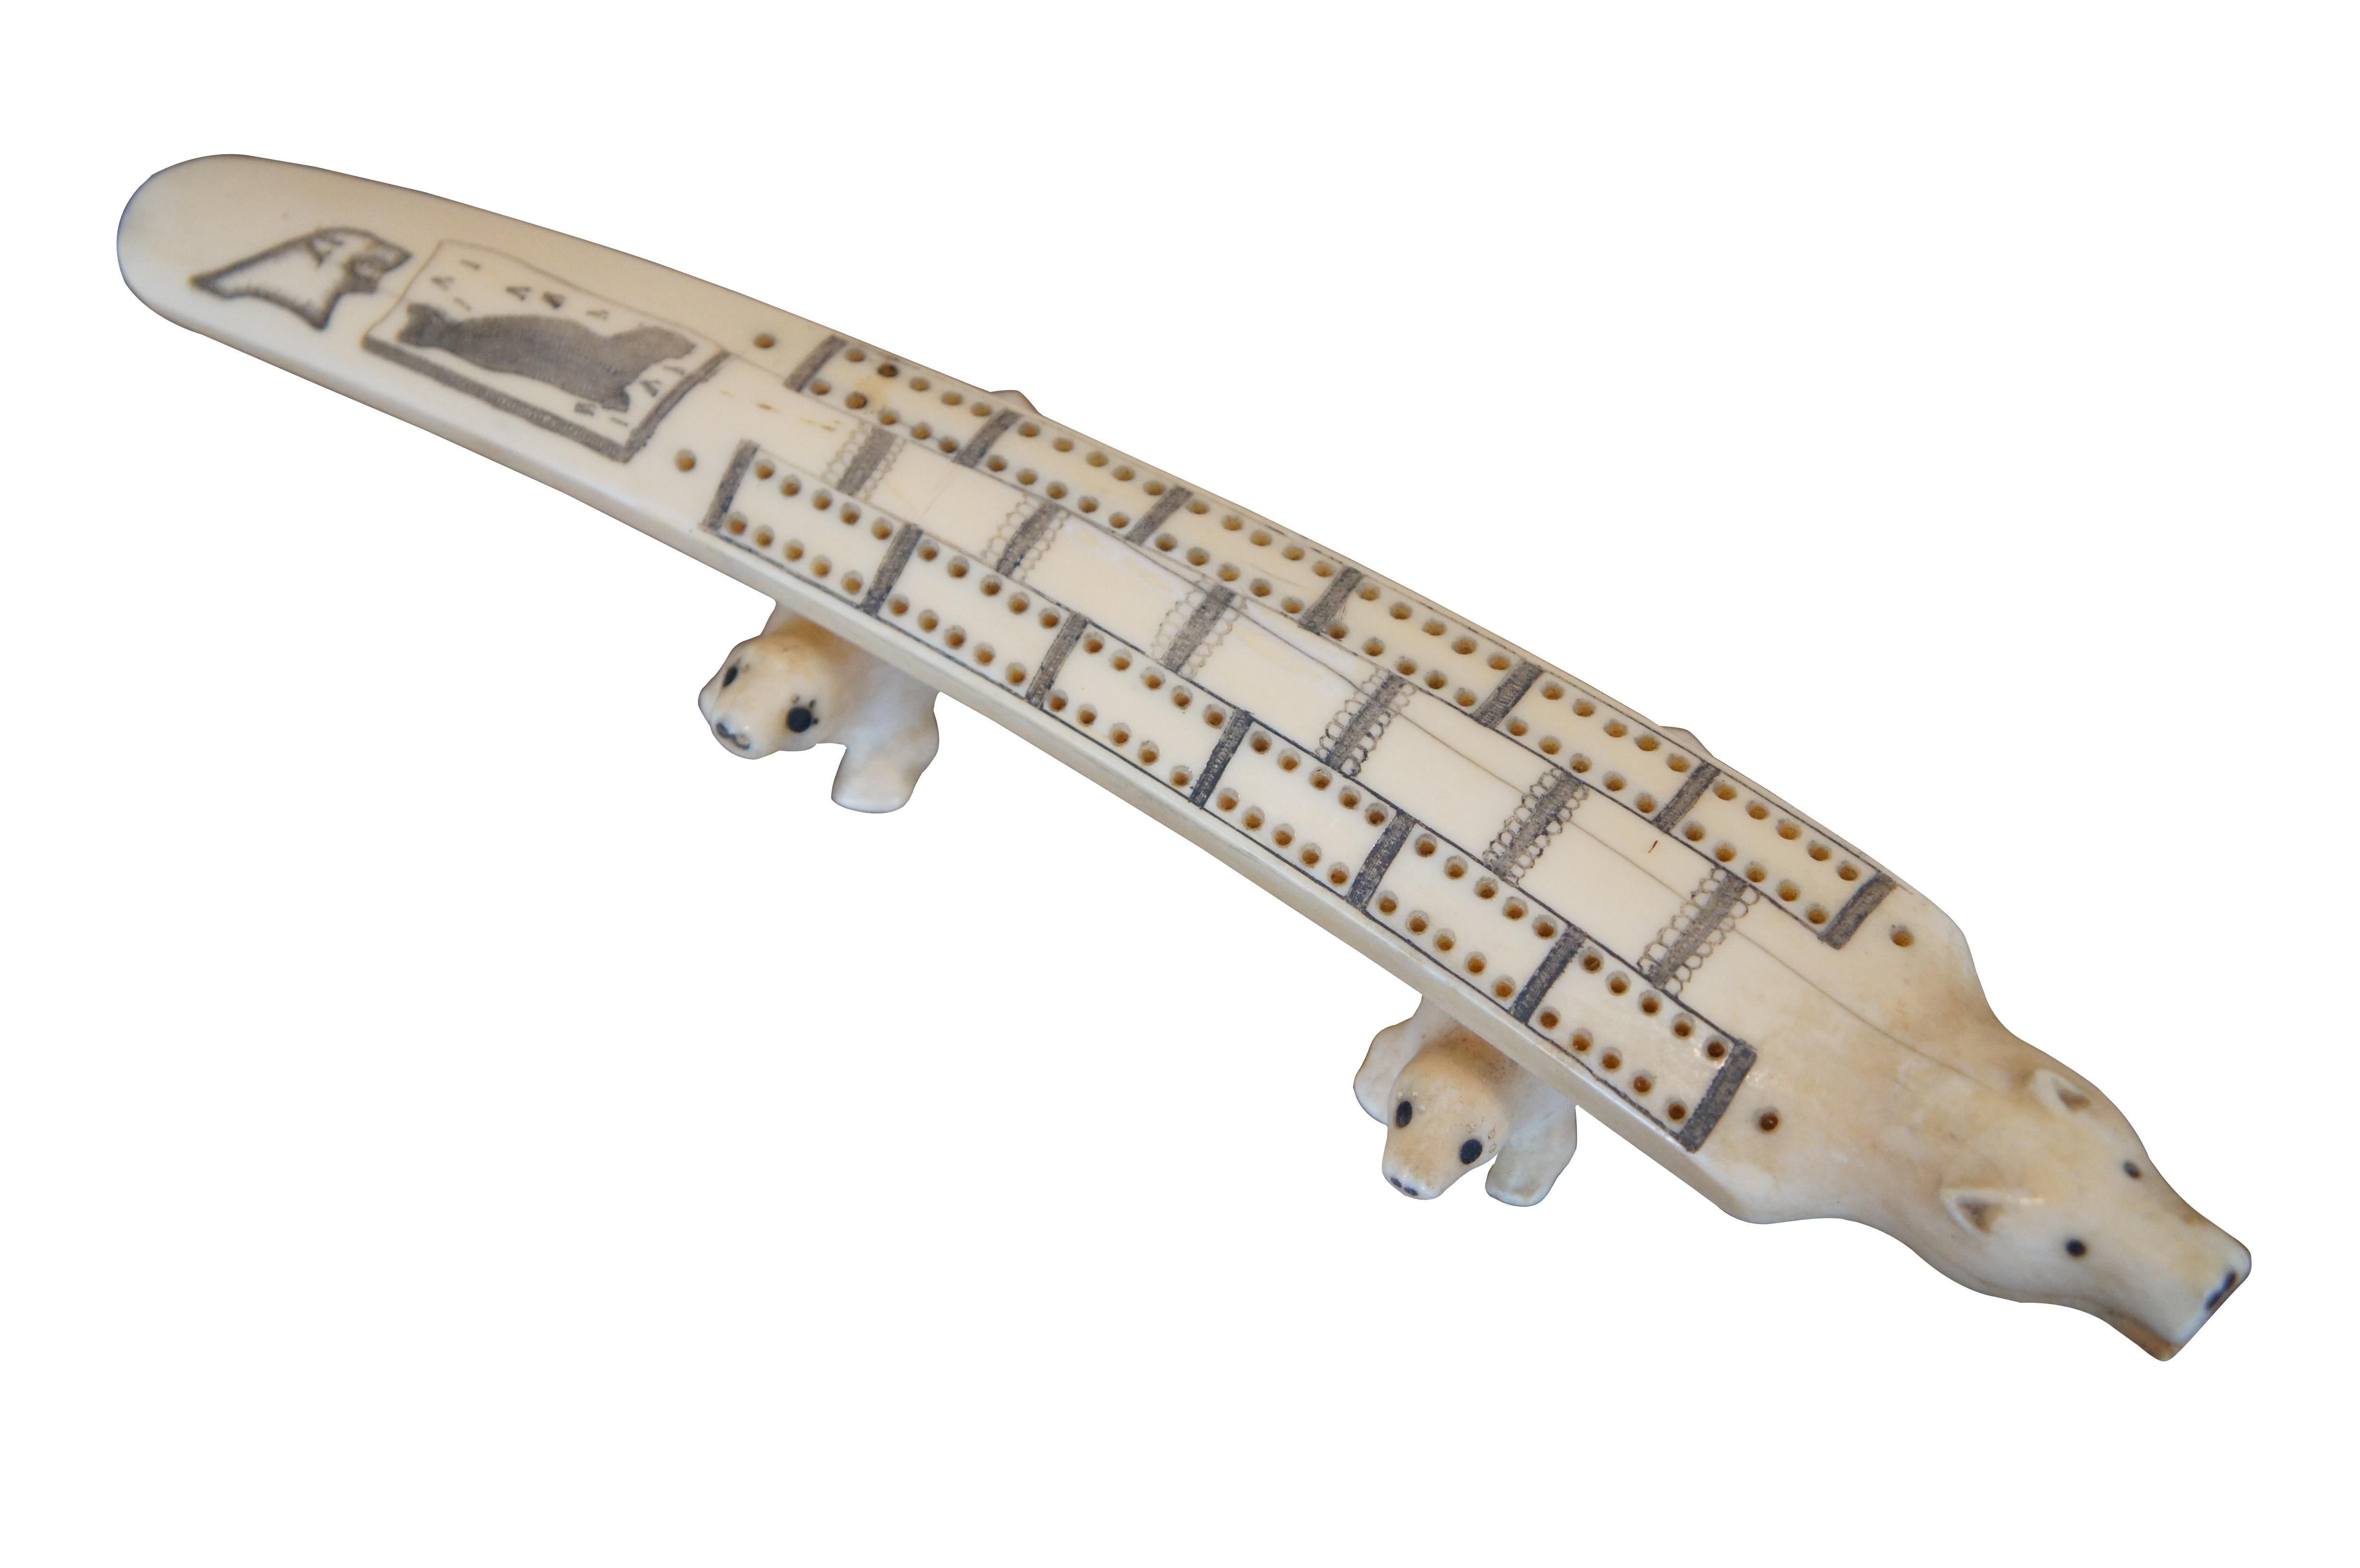 Antique Inuit folk art carved bone cribbage board featuring a Polar Bear propped up by Seals. Measure: 10